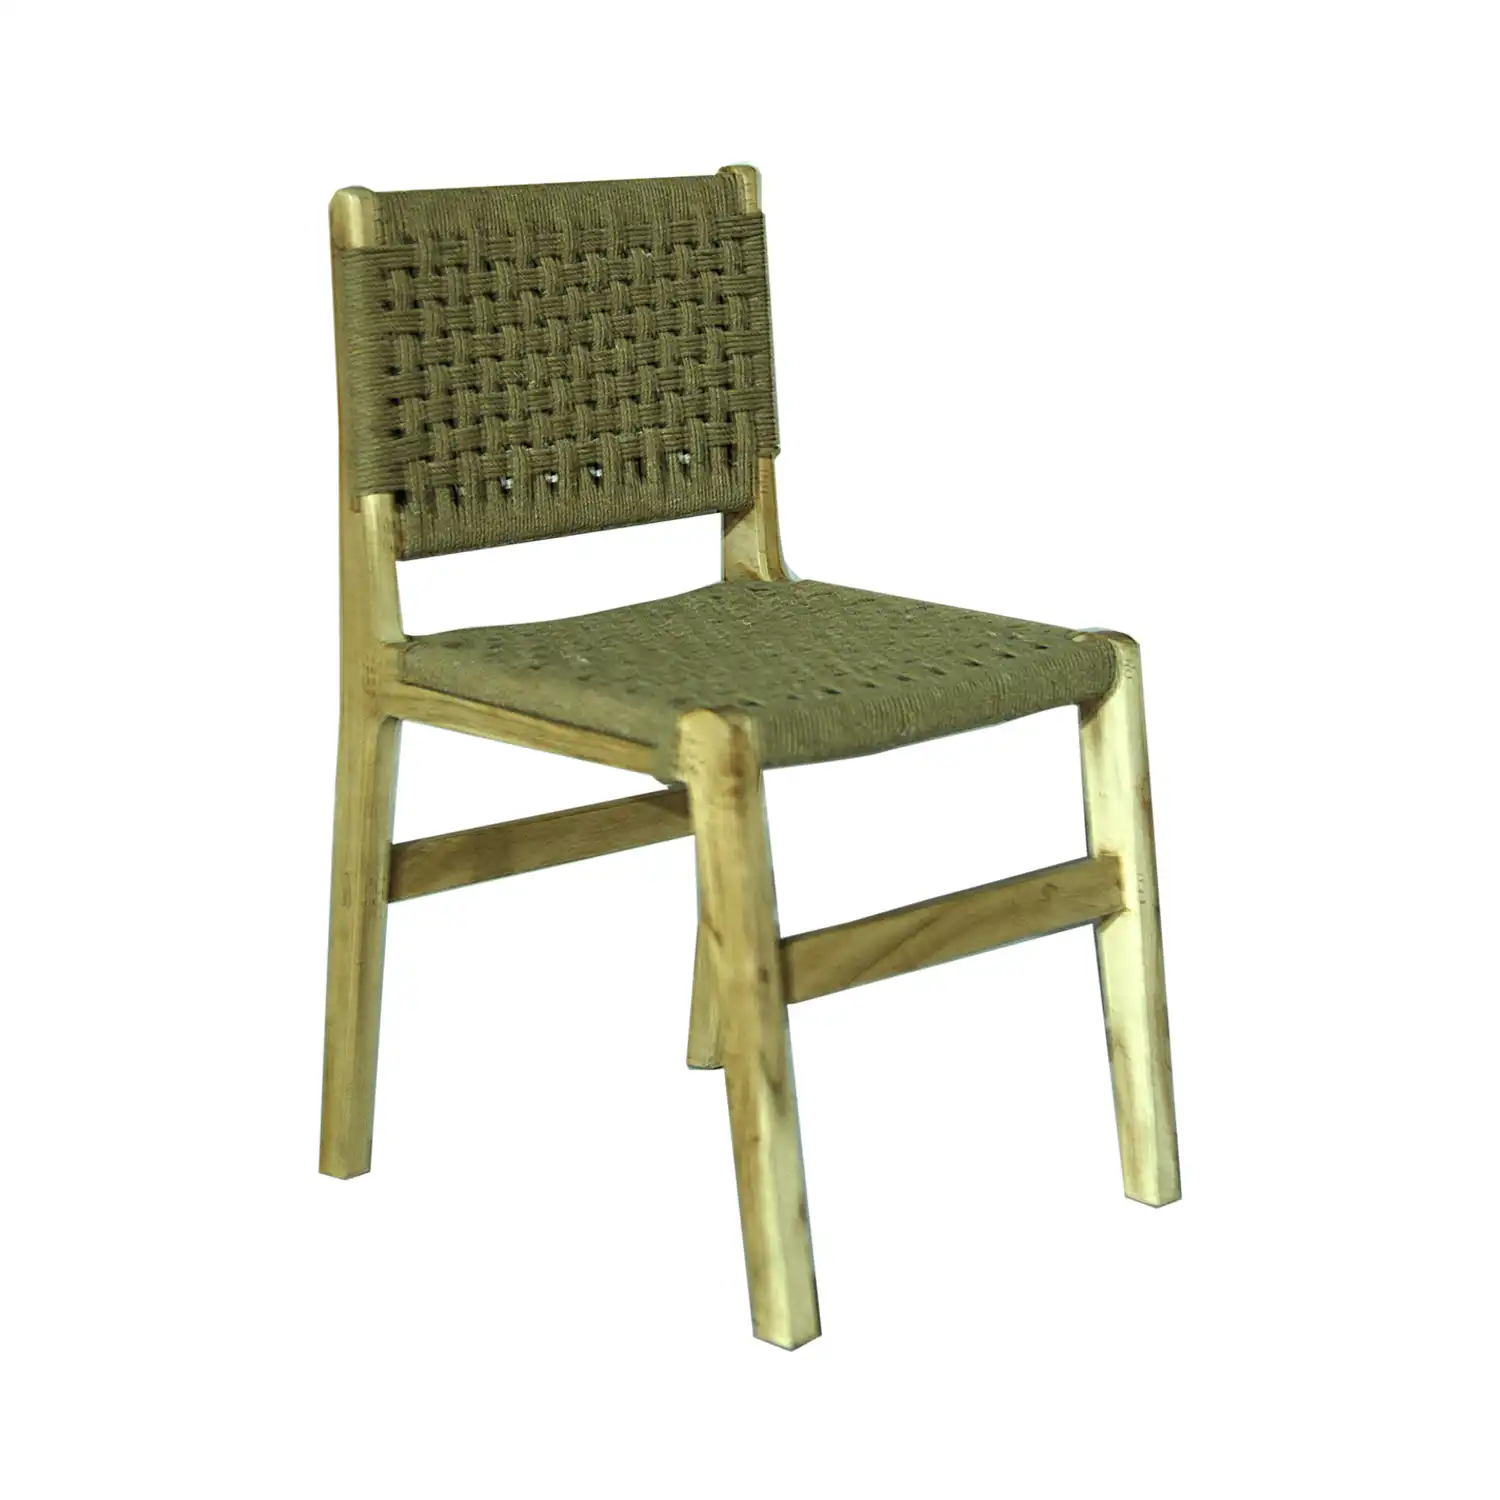 Natural Woven Acacia Wood Chair - Set of 2 Chairs - popular handicrafts